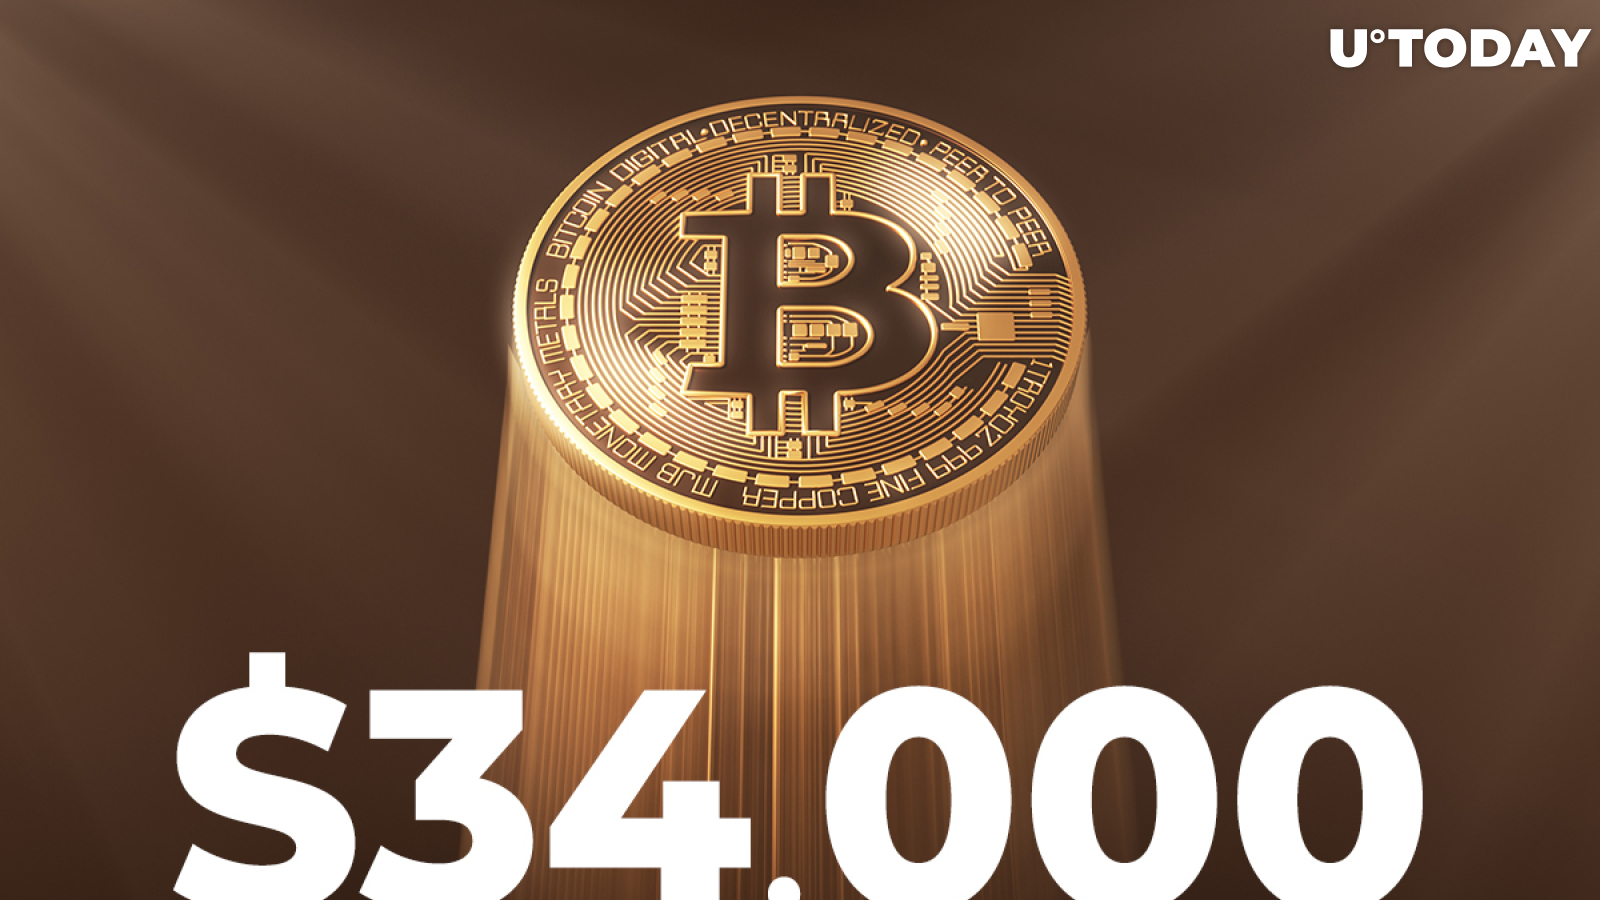 Bitcoin Jumps Back to $34,000 on Crowd Fear: Santiment